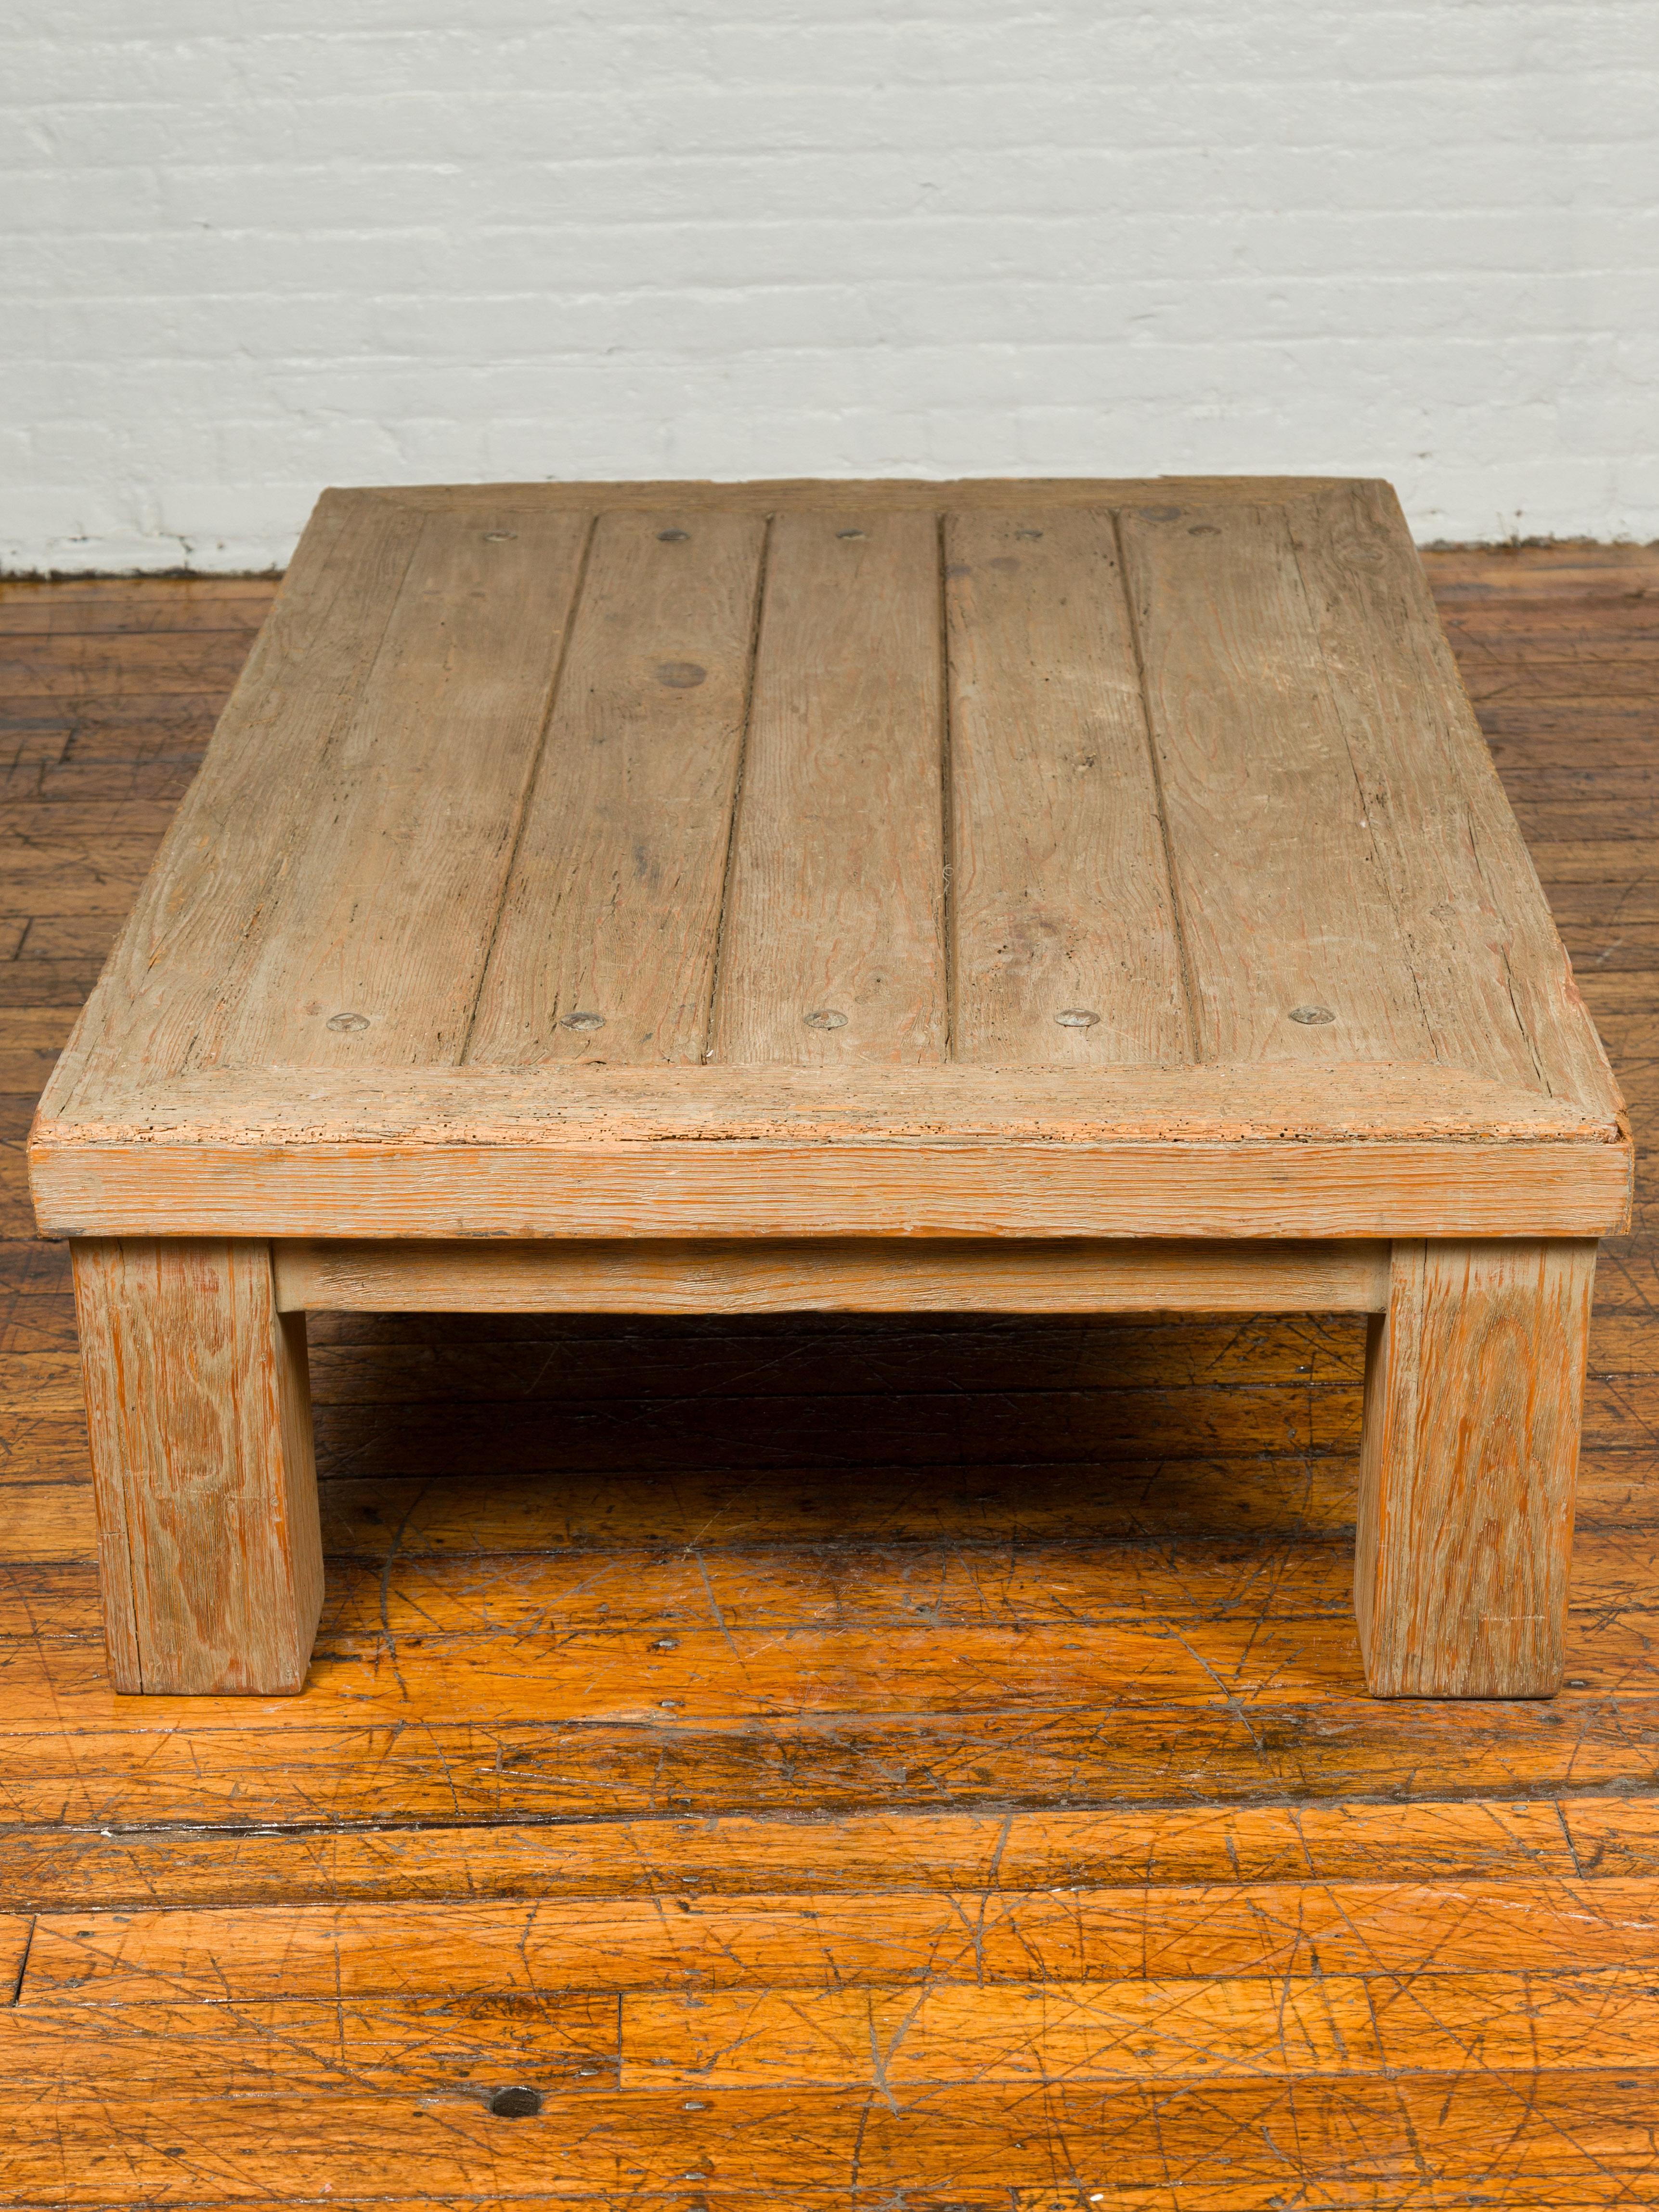 Rustic Vintage Driftwood Distressed Coffee Table from Mexico with Round Metal Studs